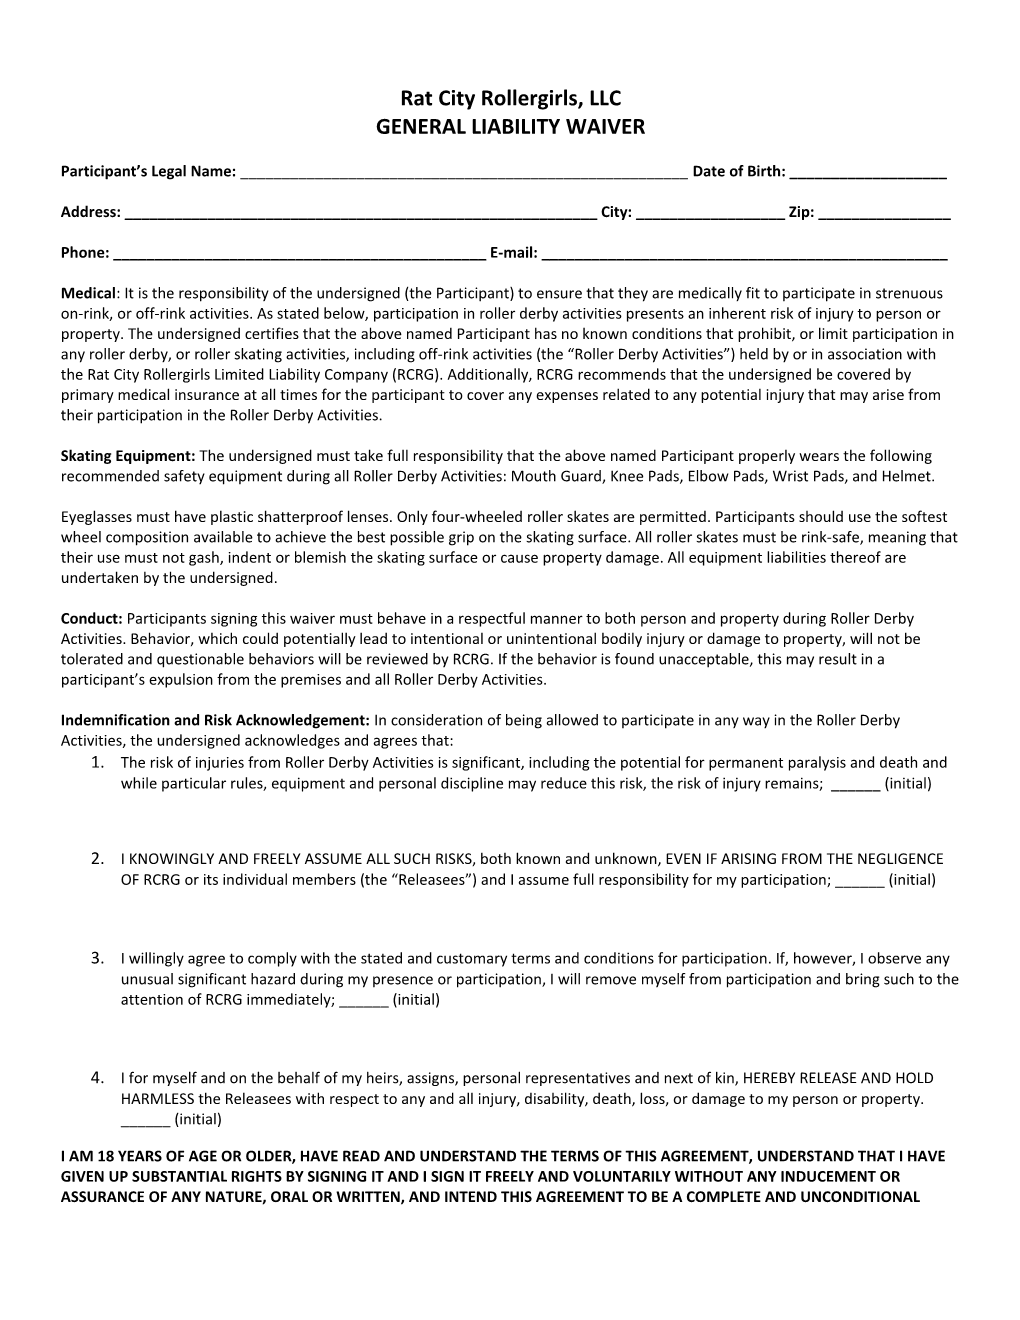 RCRG General Liability Waiver